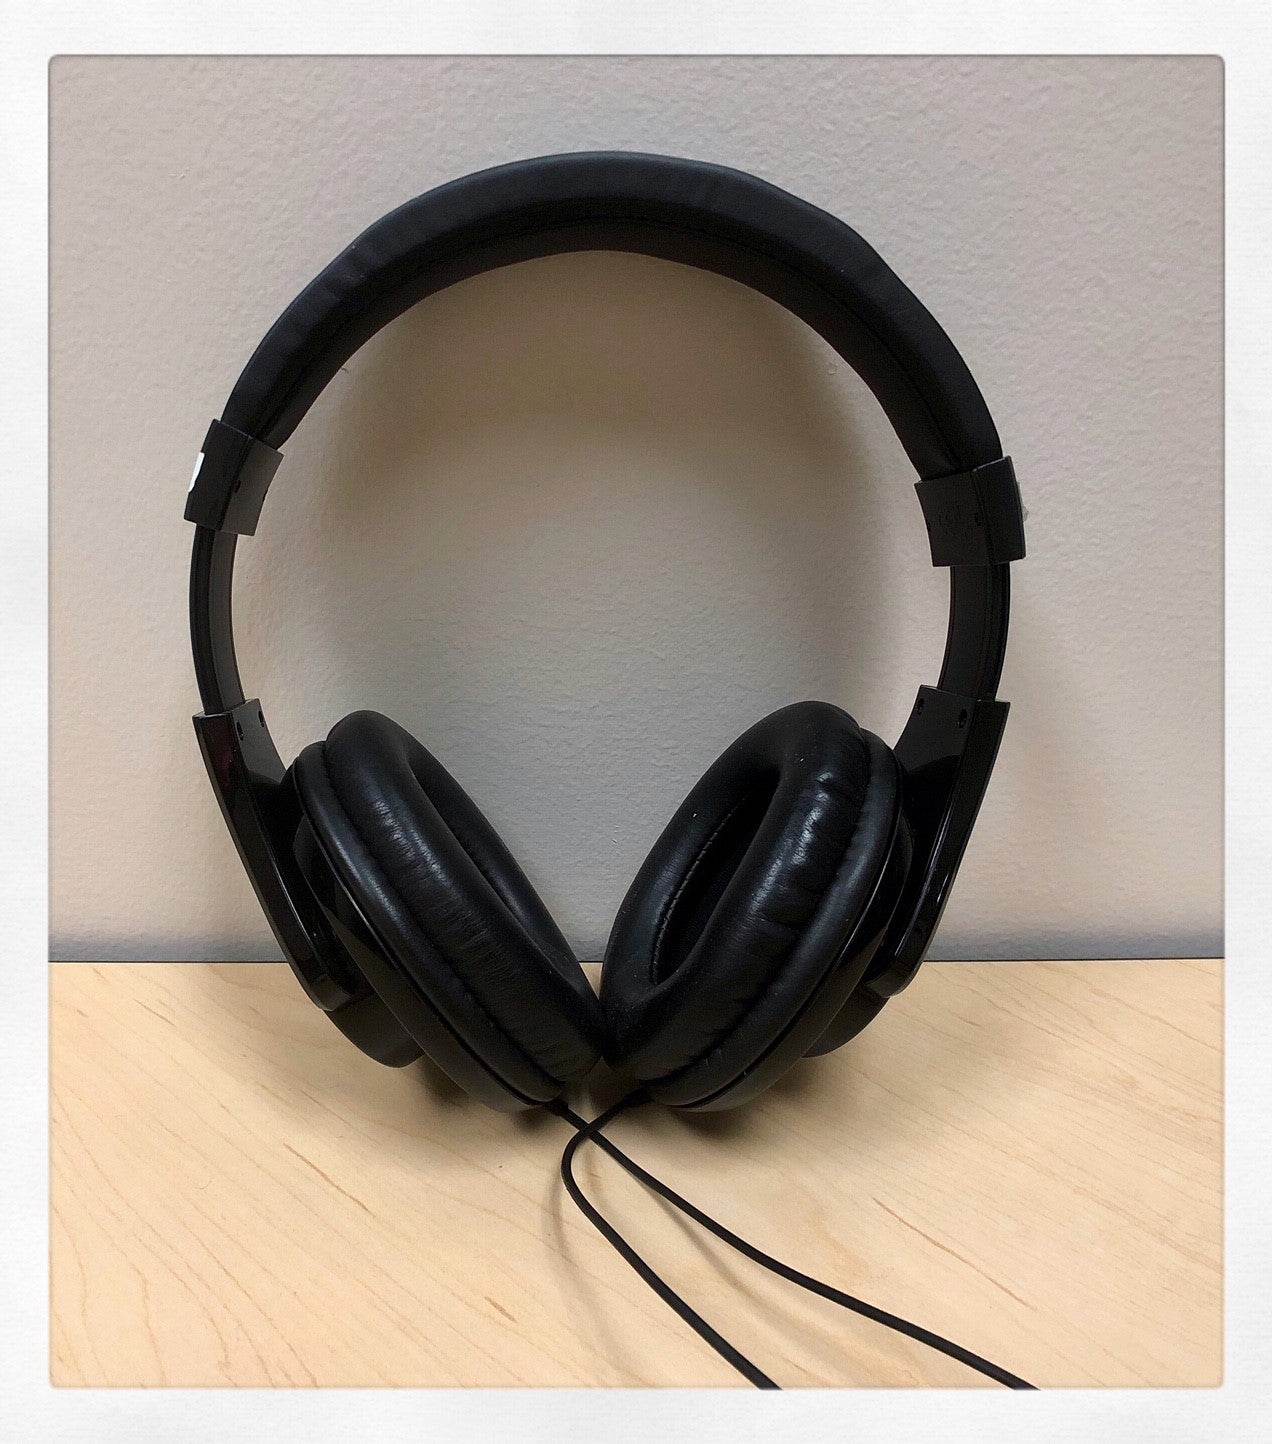 Headphones at the music library